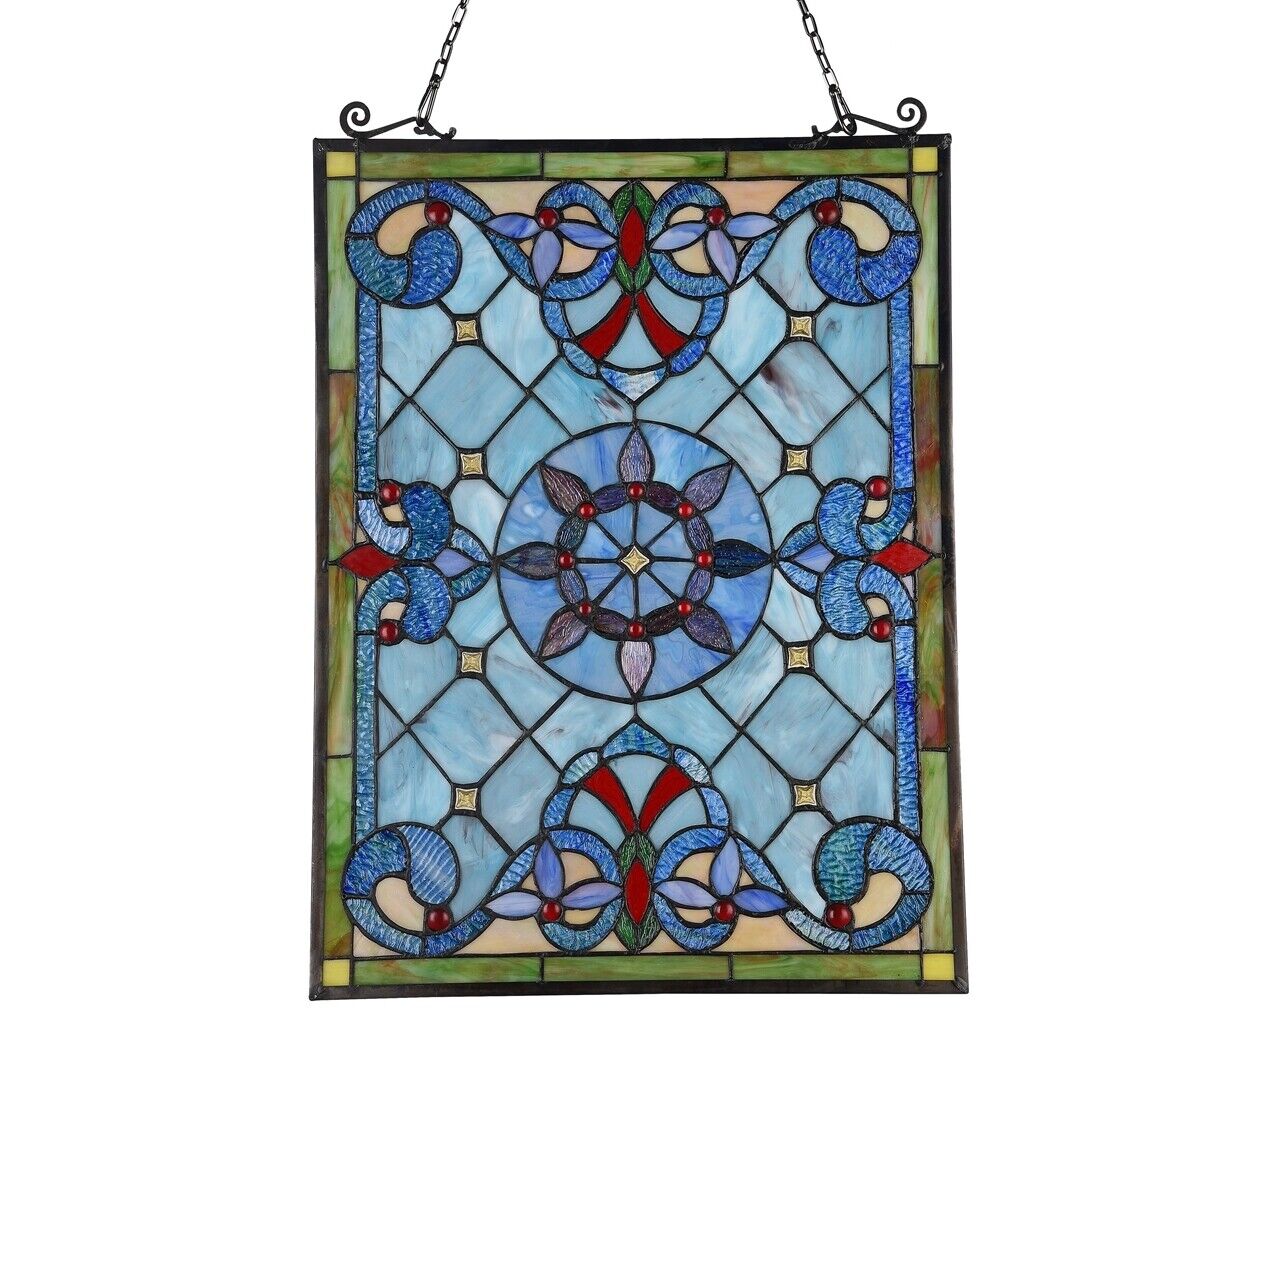 24.6" Antique Vintage Style Stained Glass Window Hanging Panel Suncatcher